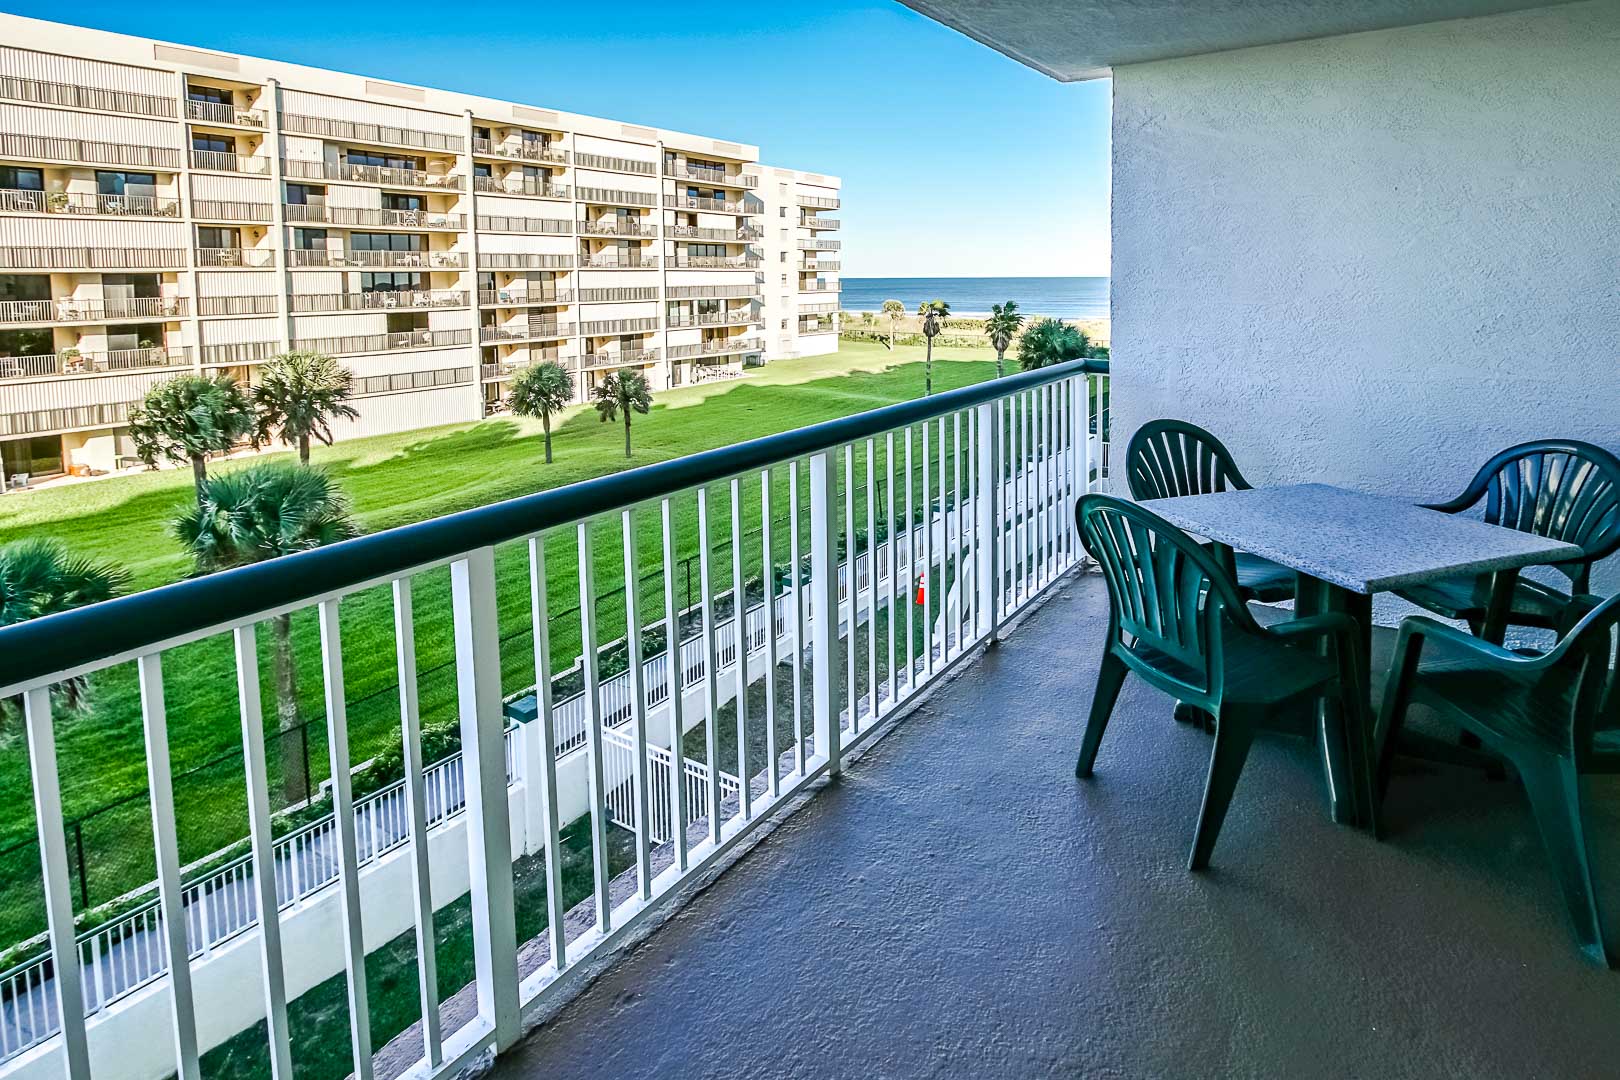 A scenic ocean view from the balcony at VRI's The Resort on Cocoa Beach in Florida.